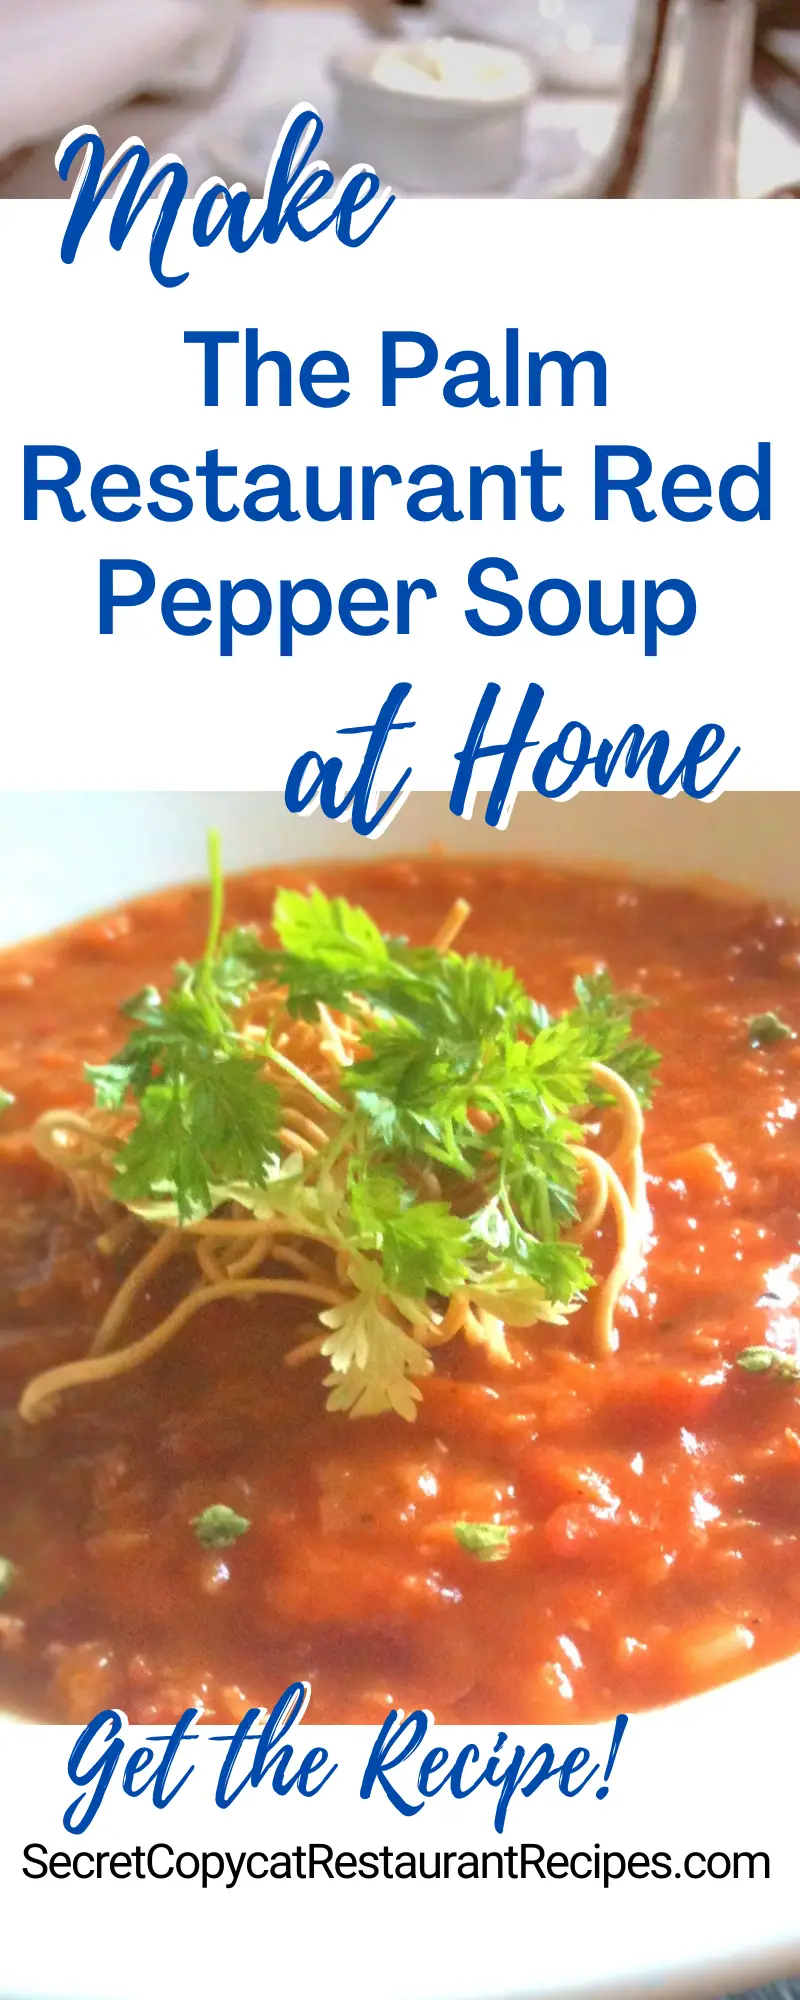 The Palm Restaurant Red Pepper Soup Recipe